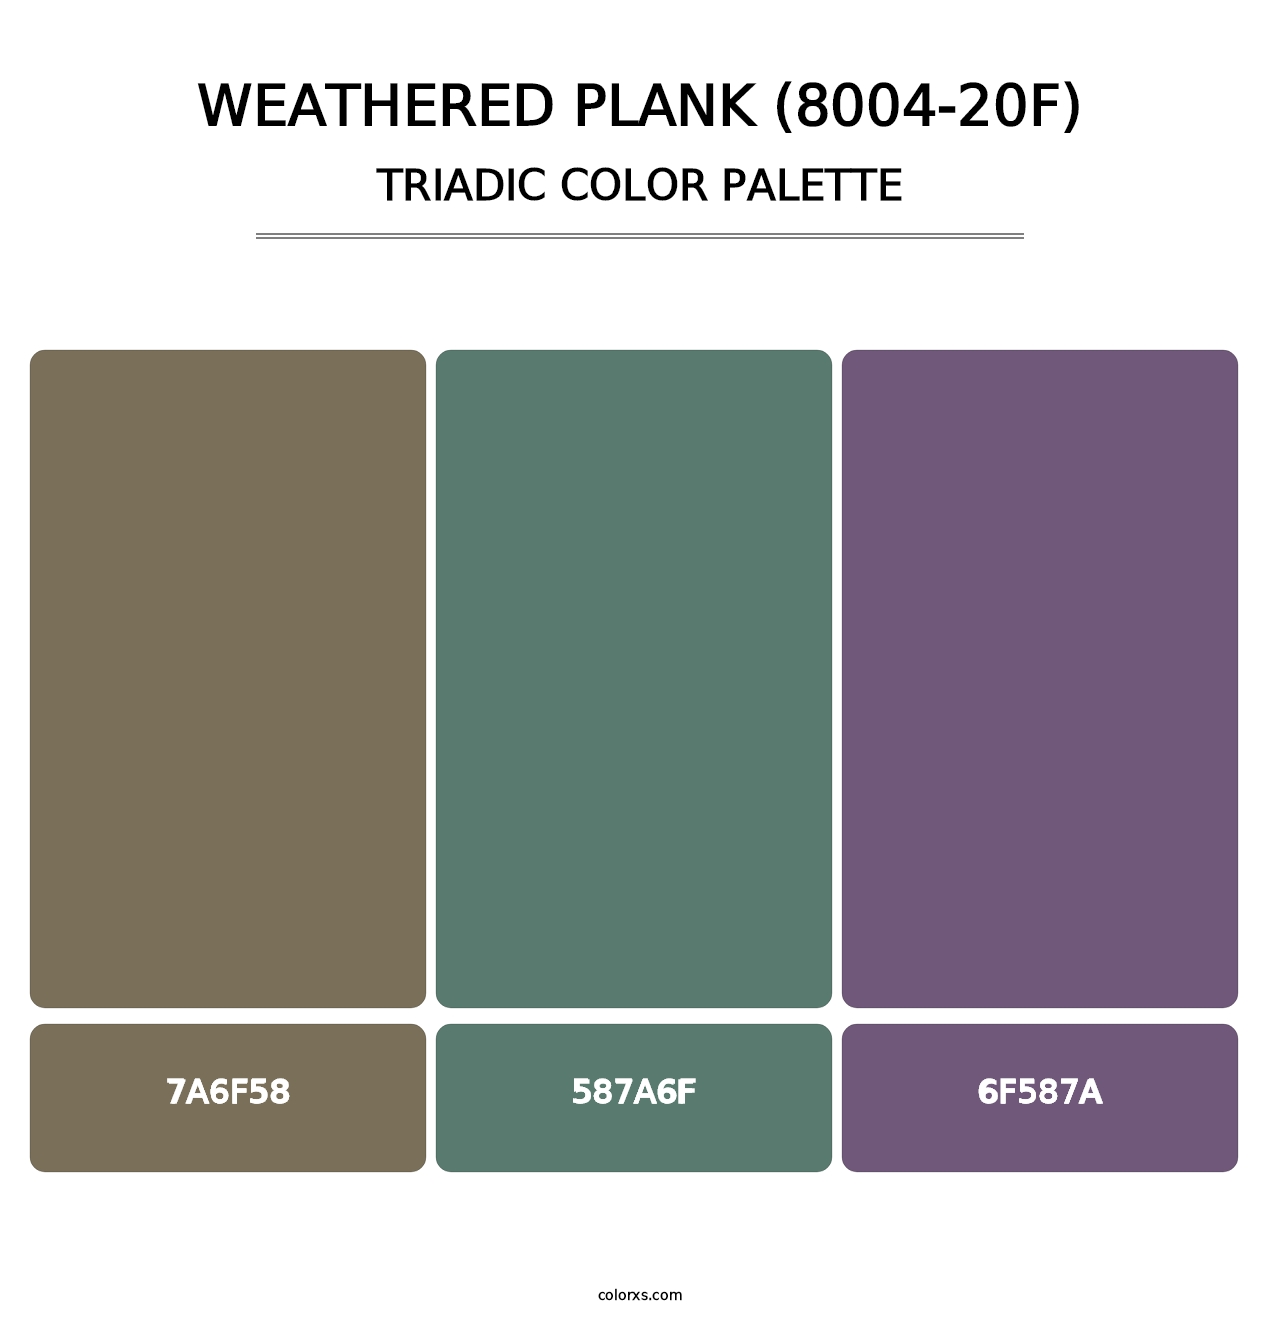 Weathered Plank (8004-20F) - Triadic Color Palette